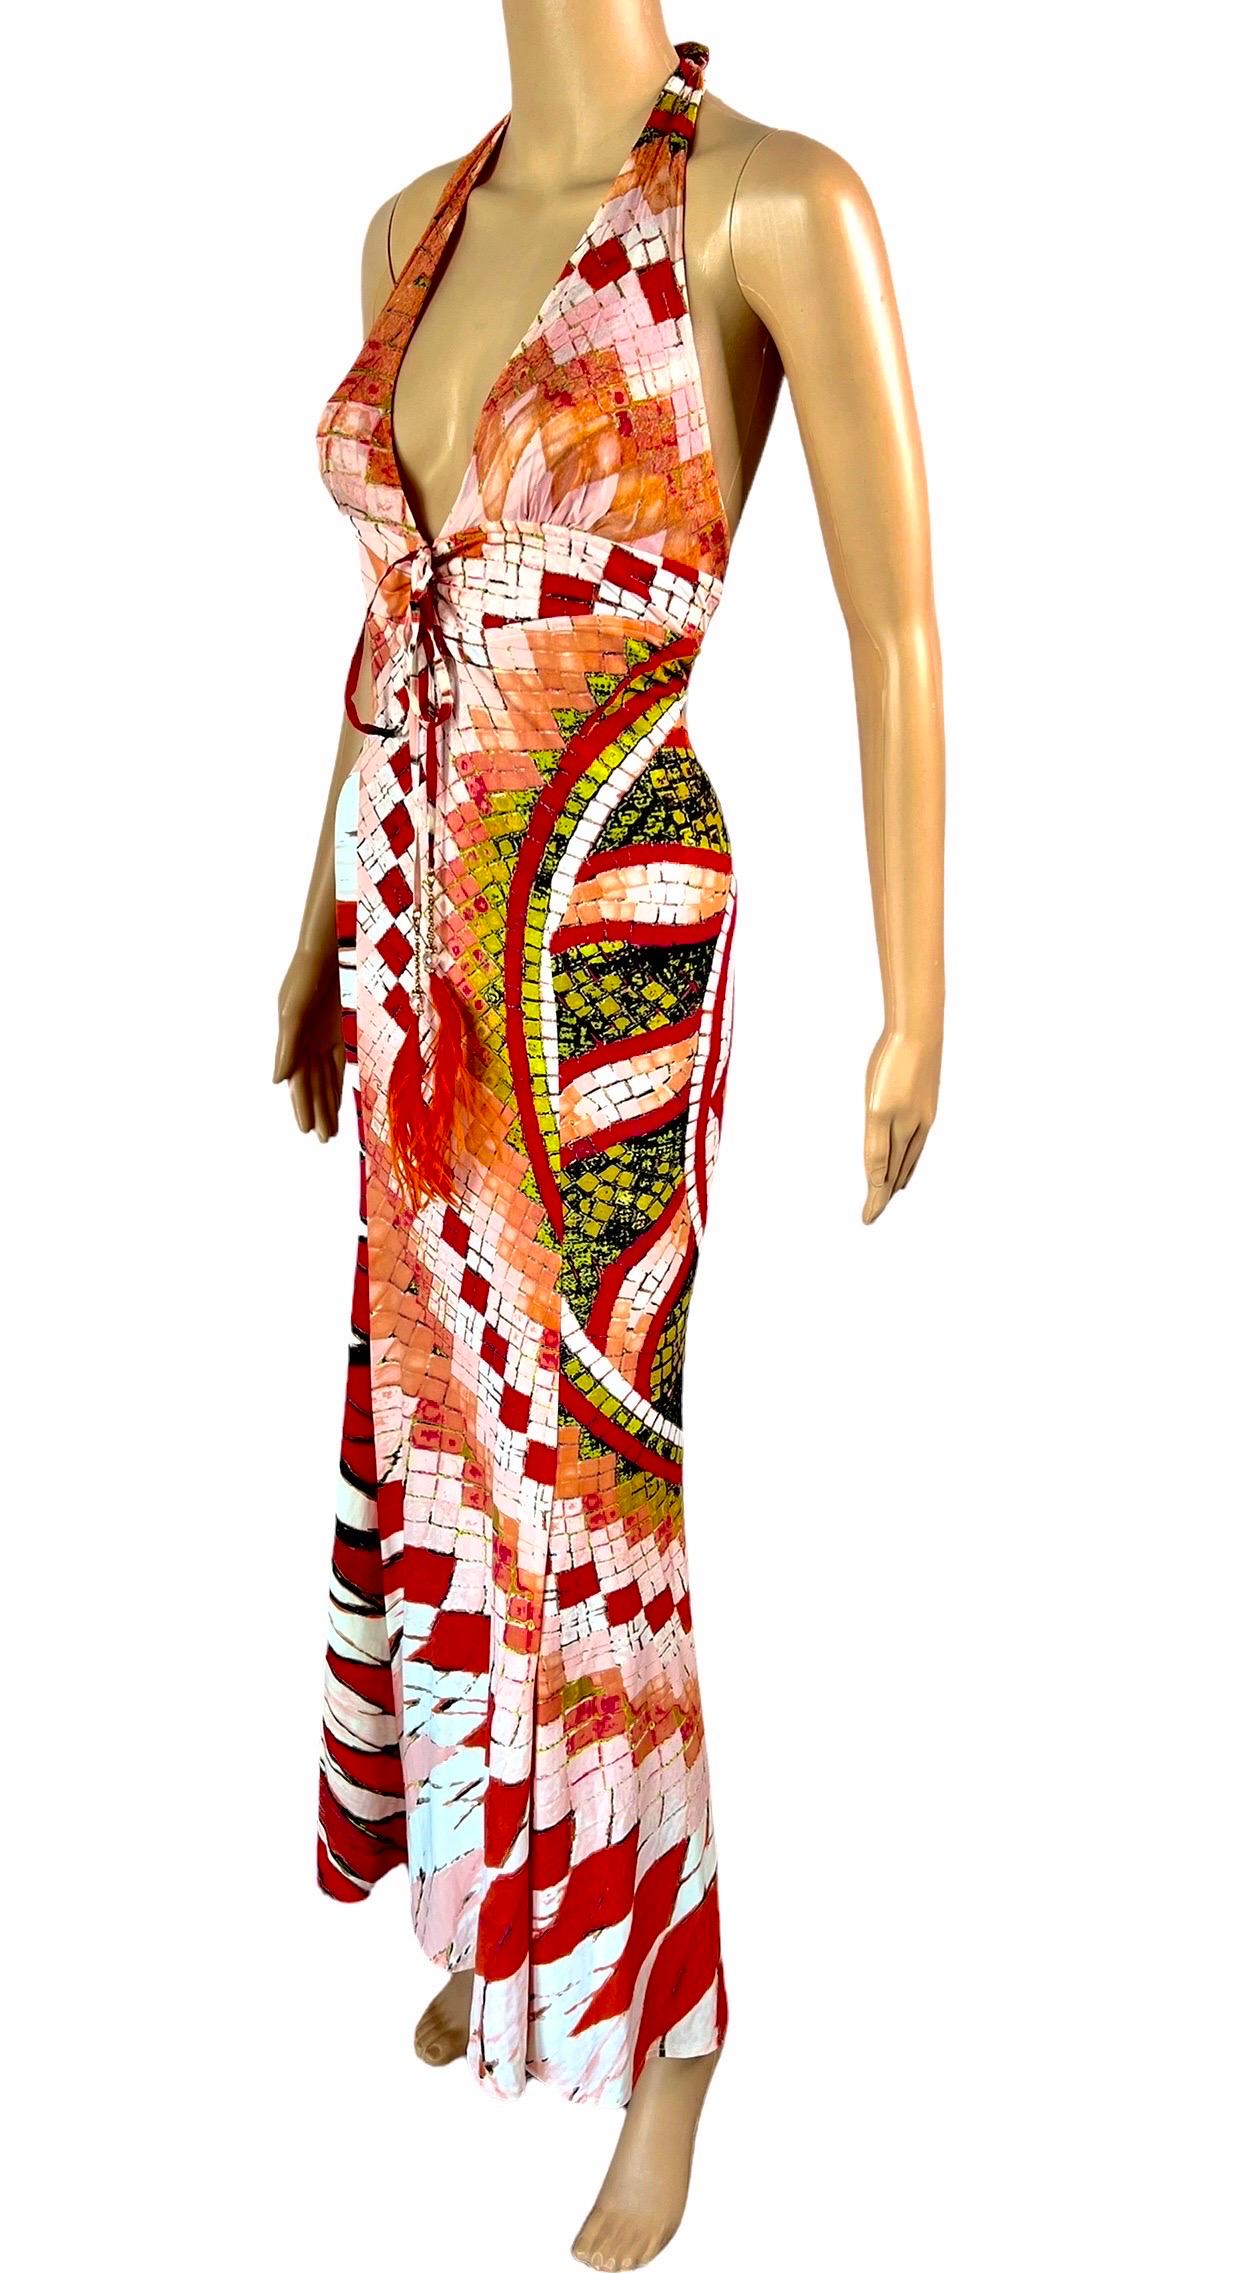 Roberto Cavalli S/S 2004 Plunging Neckline Backless Maxi Evening Dress Gown For Sale 2